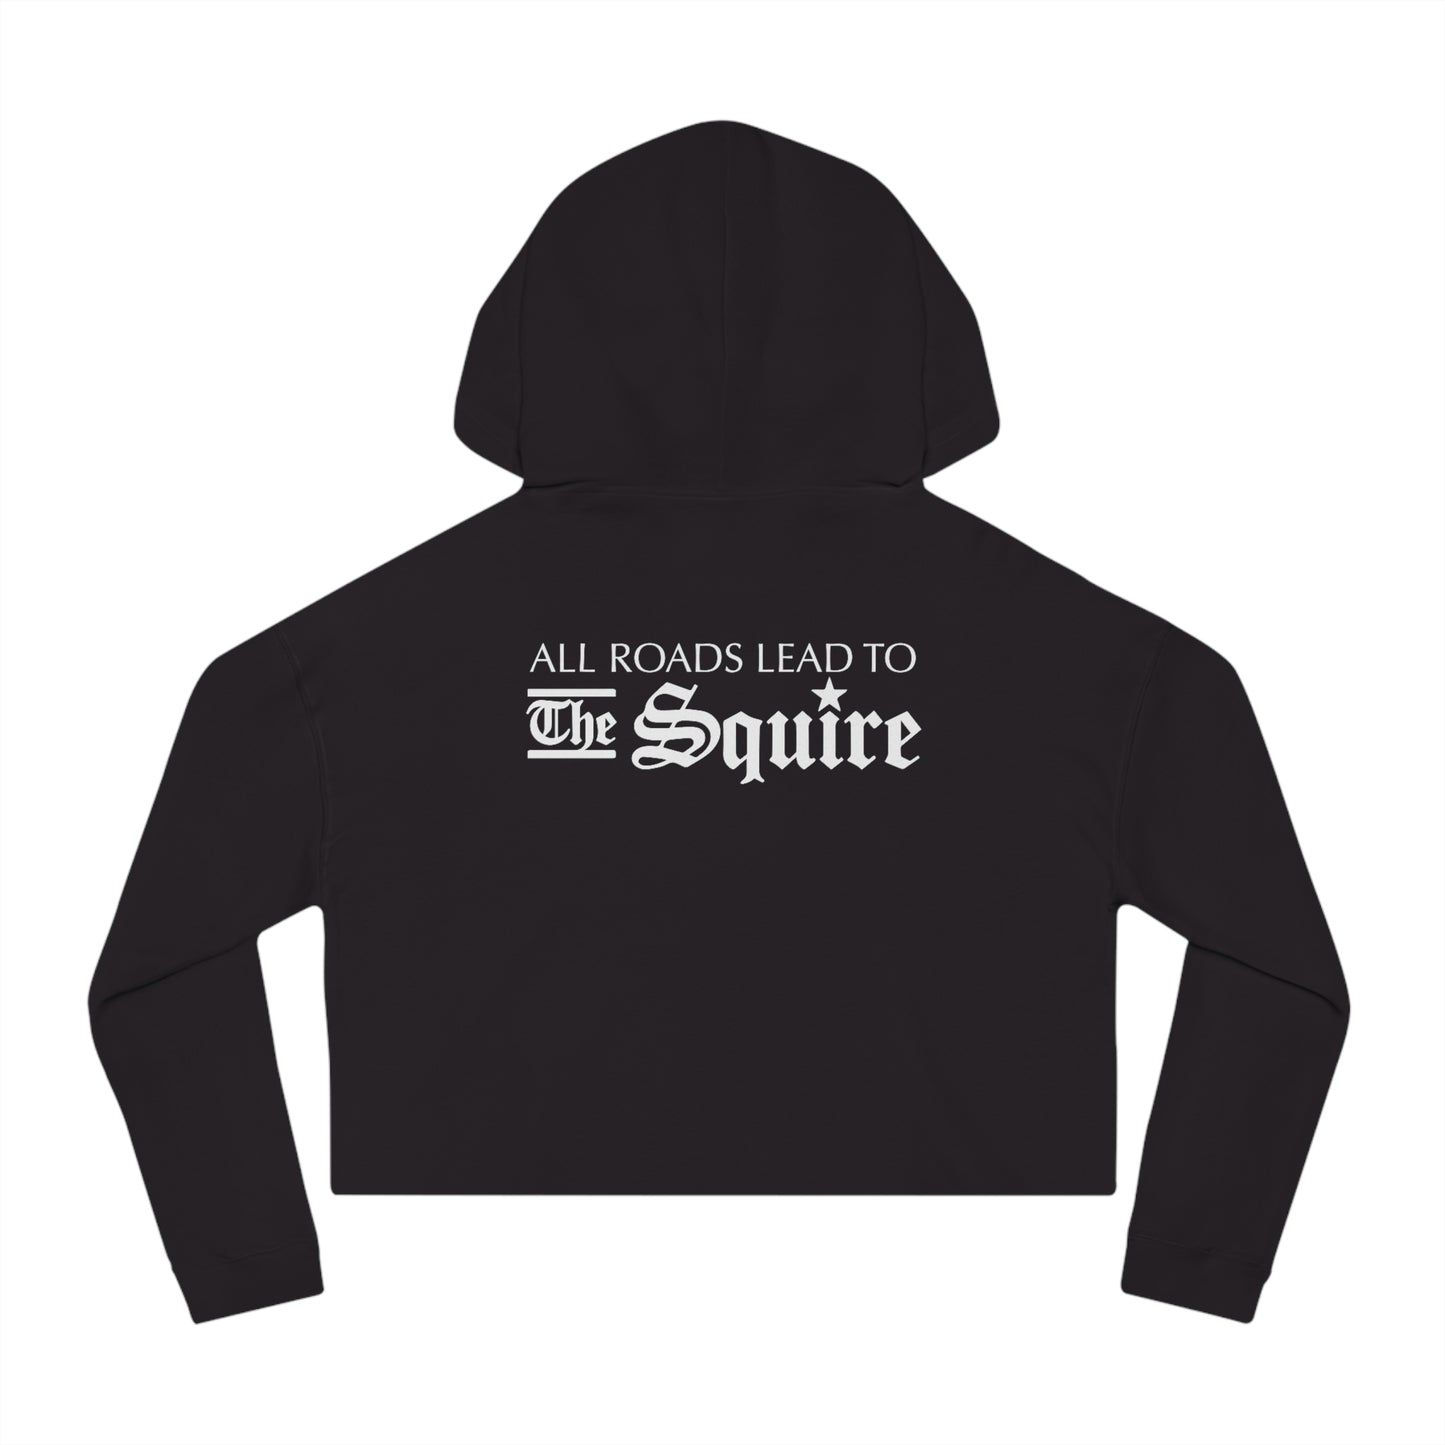 The Squire Women’s Cropped Hooded Sweatshirt